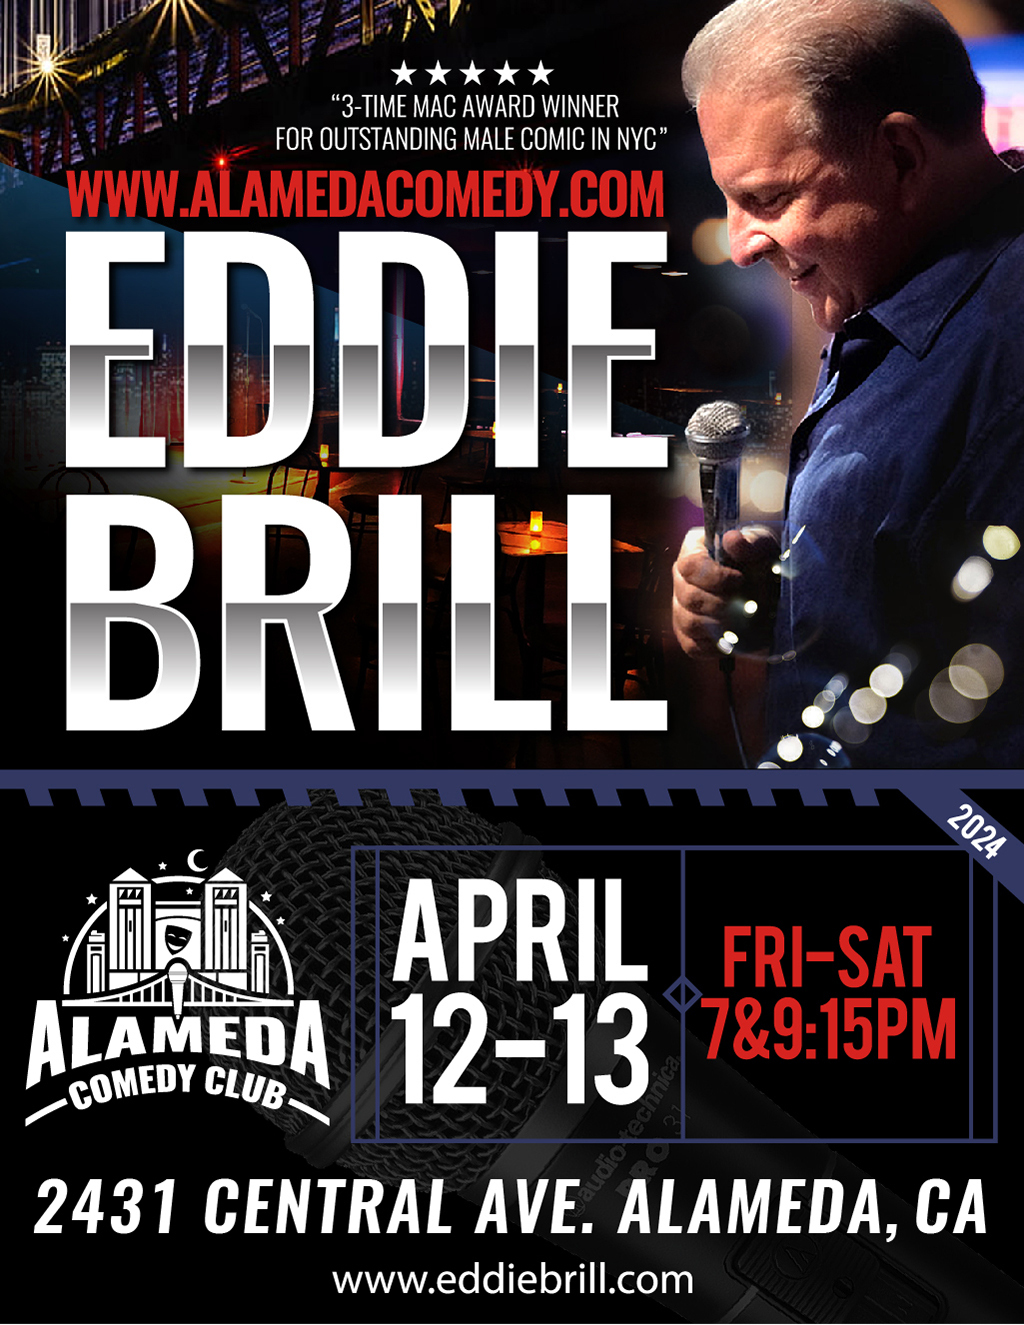 Alameda Comedy Club 3 TIME MAC AWARD WINNER FOR OUTSTANDING MALE COMIC IN NYC promotion flier on Digifli com